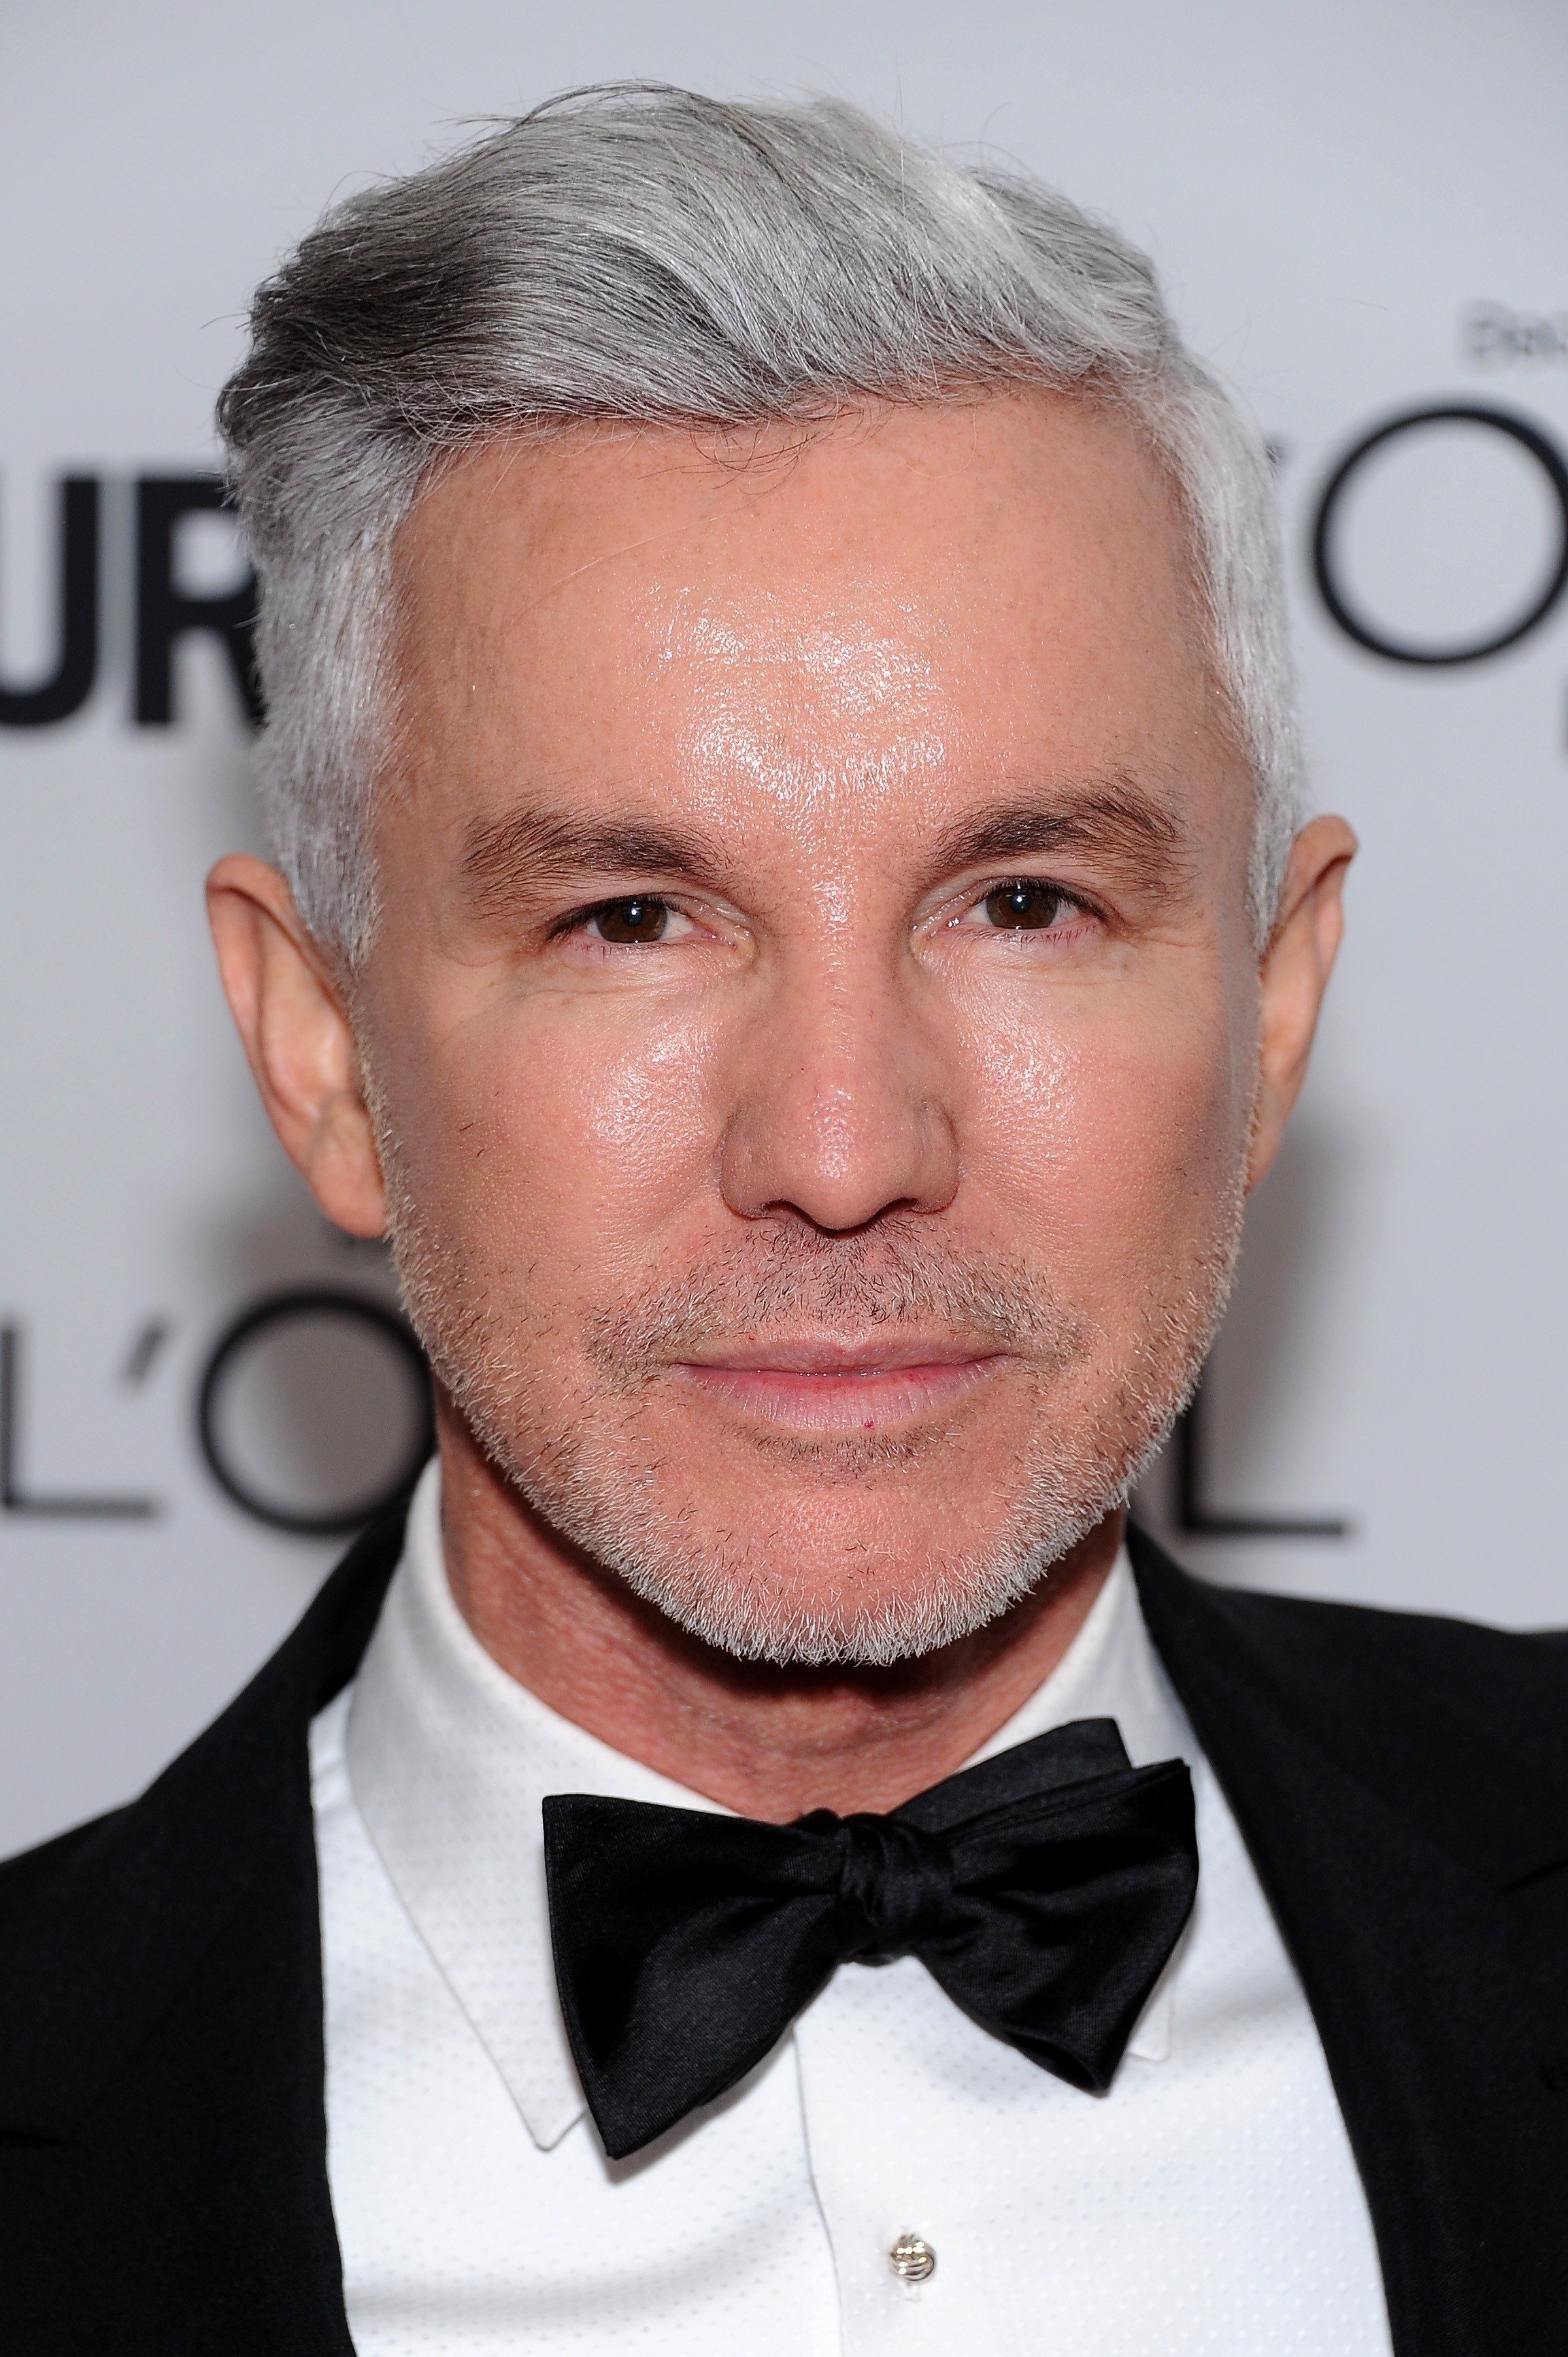 NEW YORK, NY - NOVEMBER 11:  Baz Luhrmann attends Glamour's 23rd annual Women of the Year awards on November 11, 2013 in New York City.  (Photo by Dimitrios Kambouris/Getty Images for Glamour) (Foto: Editora Globo)